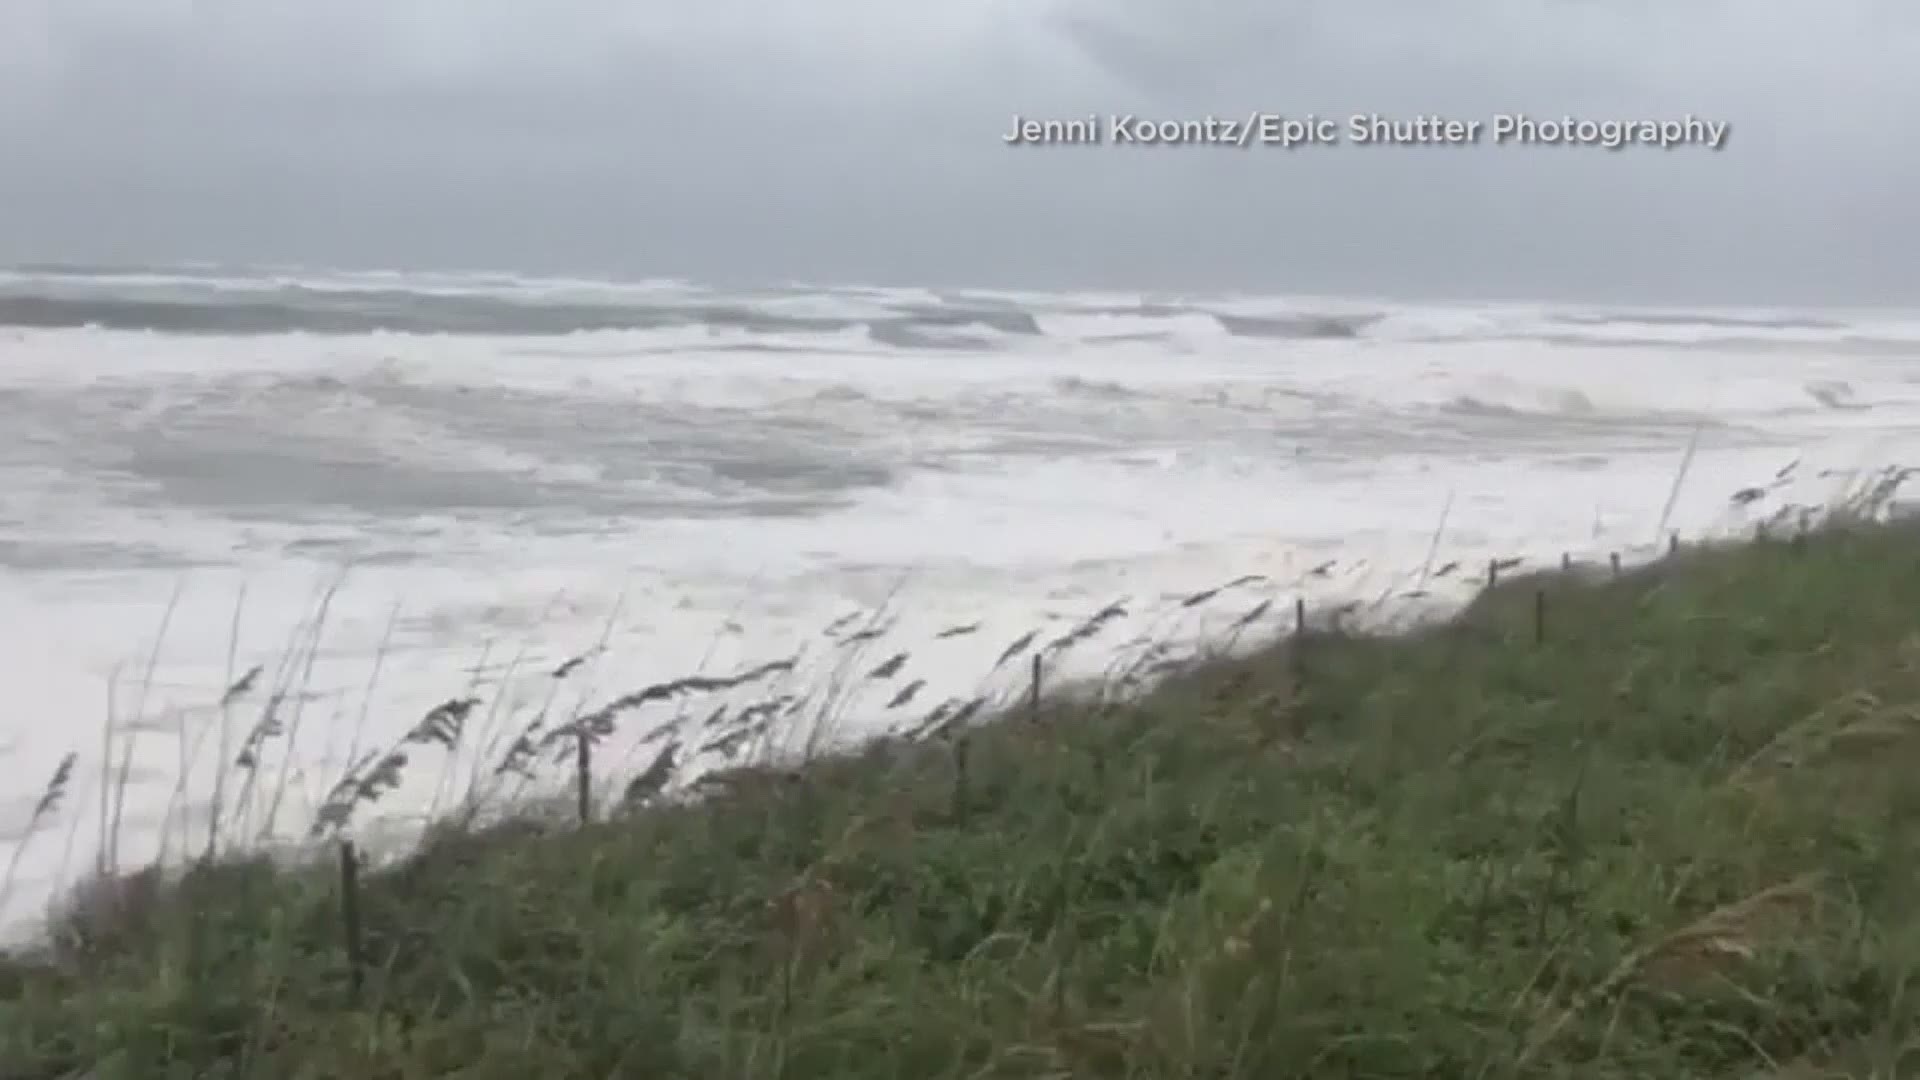 Check out this video by Jenni Koontz/Epic Shutter Photography of the flooding at Hatteras Island, NC as Hurricane Florence moves in